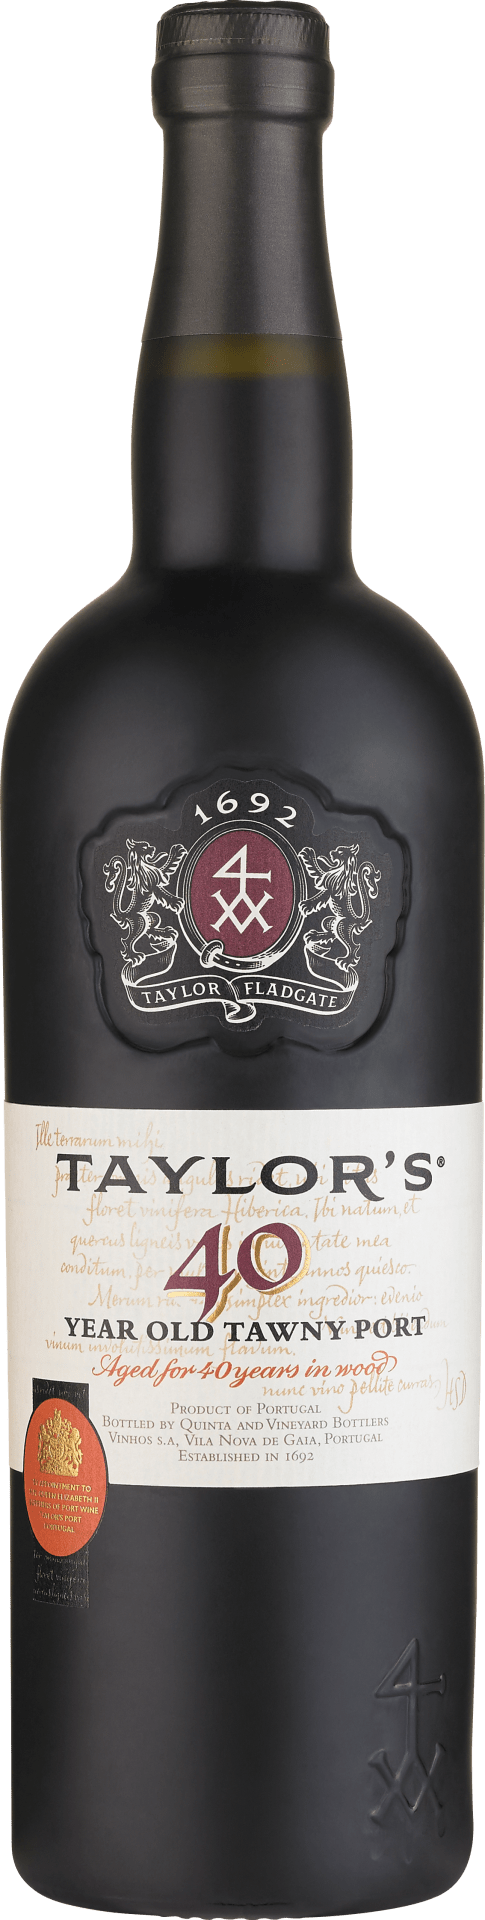 Taylor’s Port Tawny 40 Years Old - 0.75 l